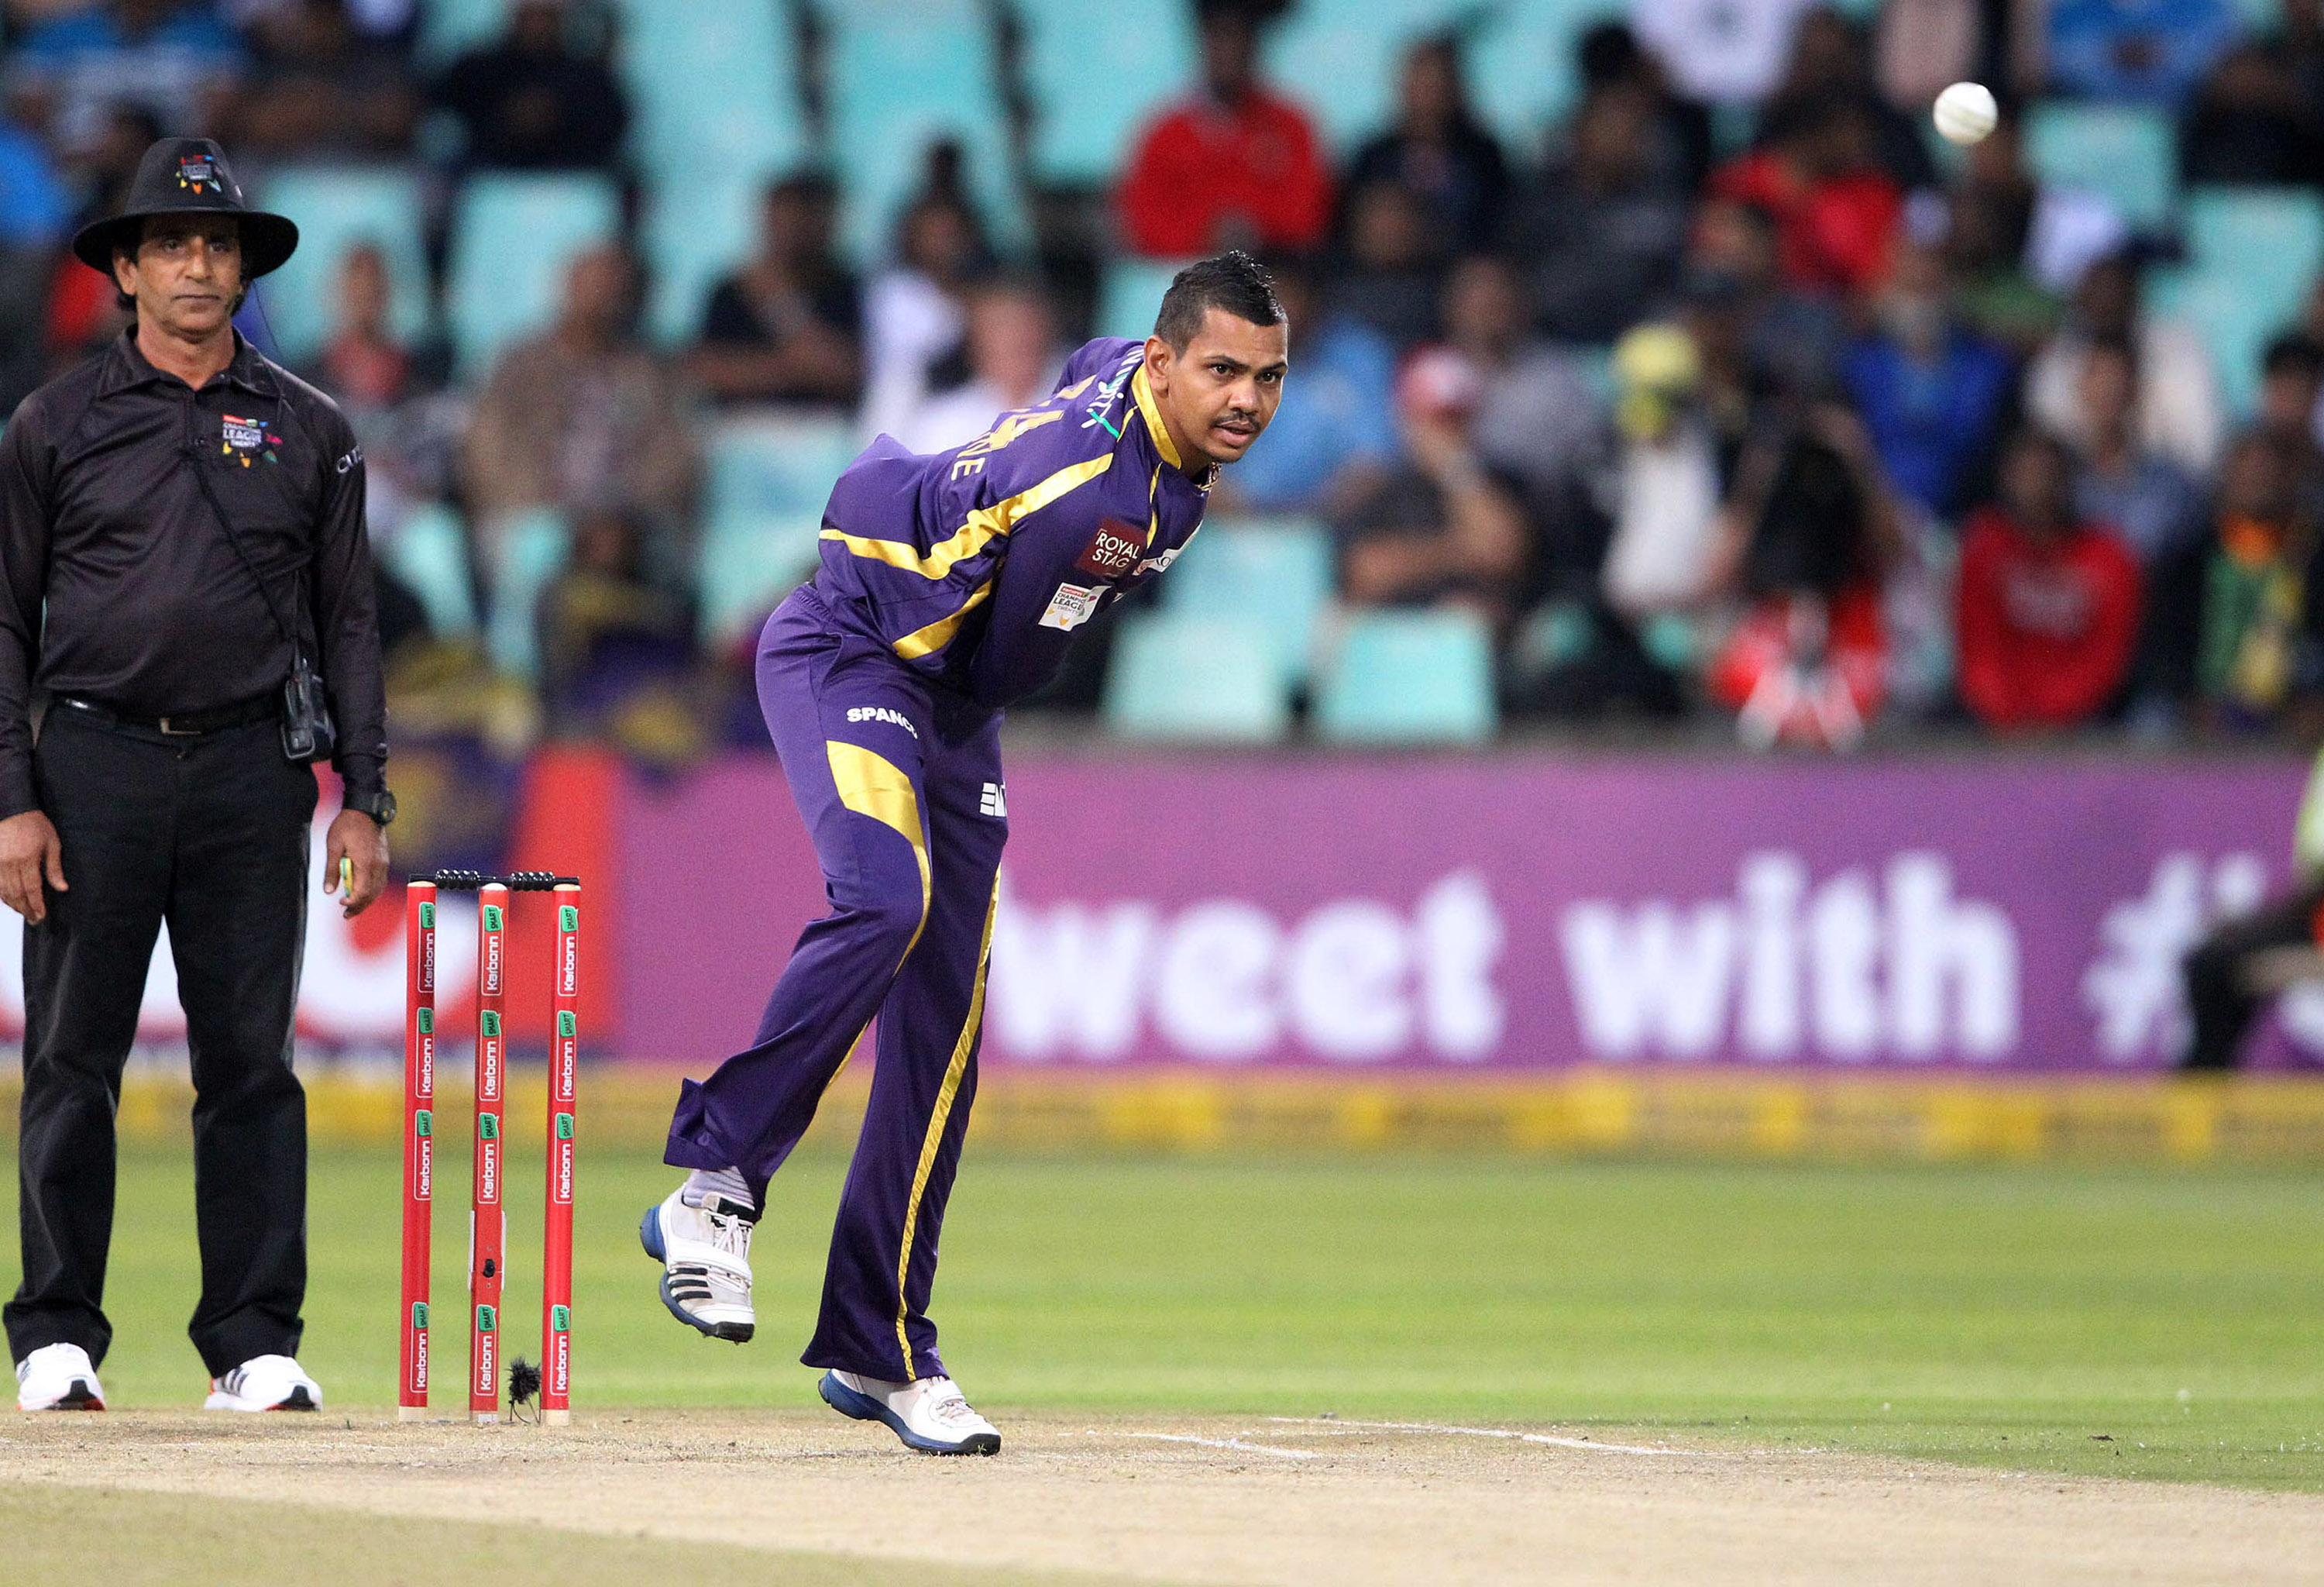 IPL 2019 | Sunil Narine looks in good shape and ready to go, says Carl Crowe